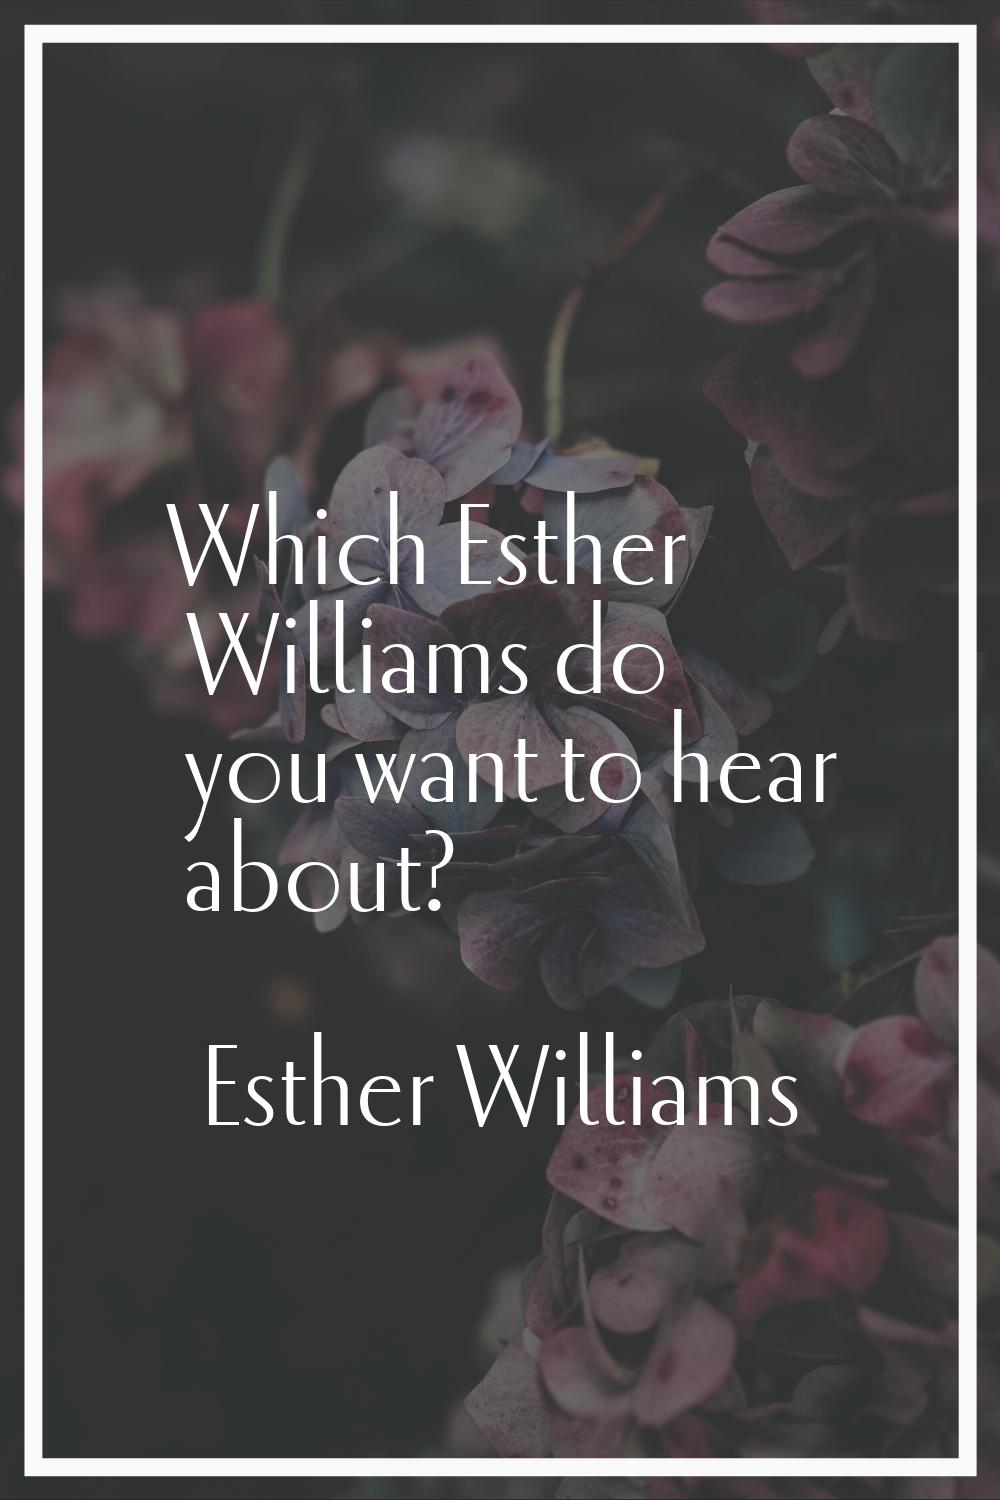 Which Esther Williams do you want to hear about?